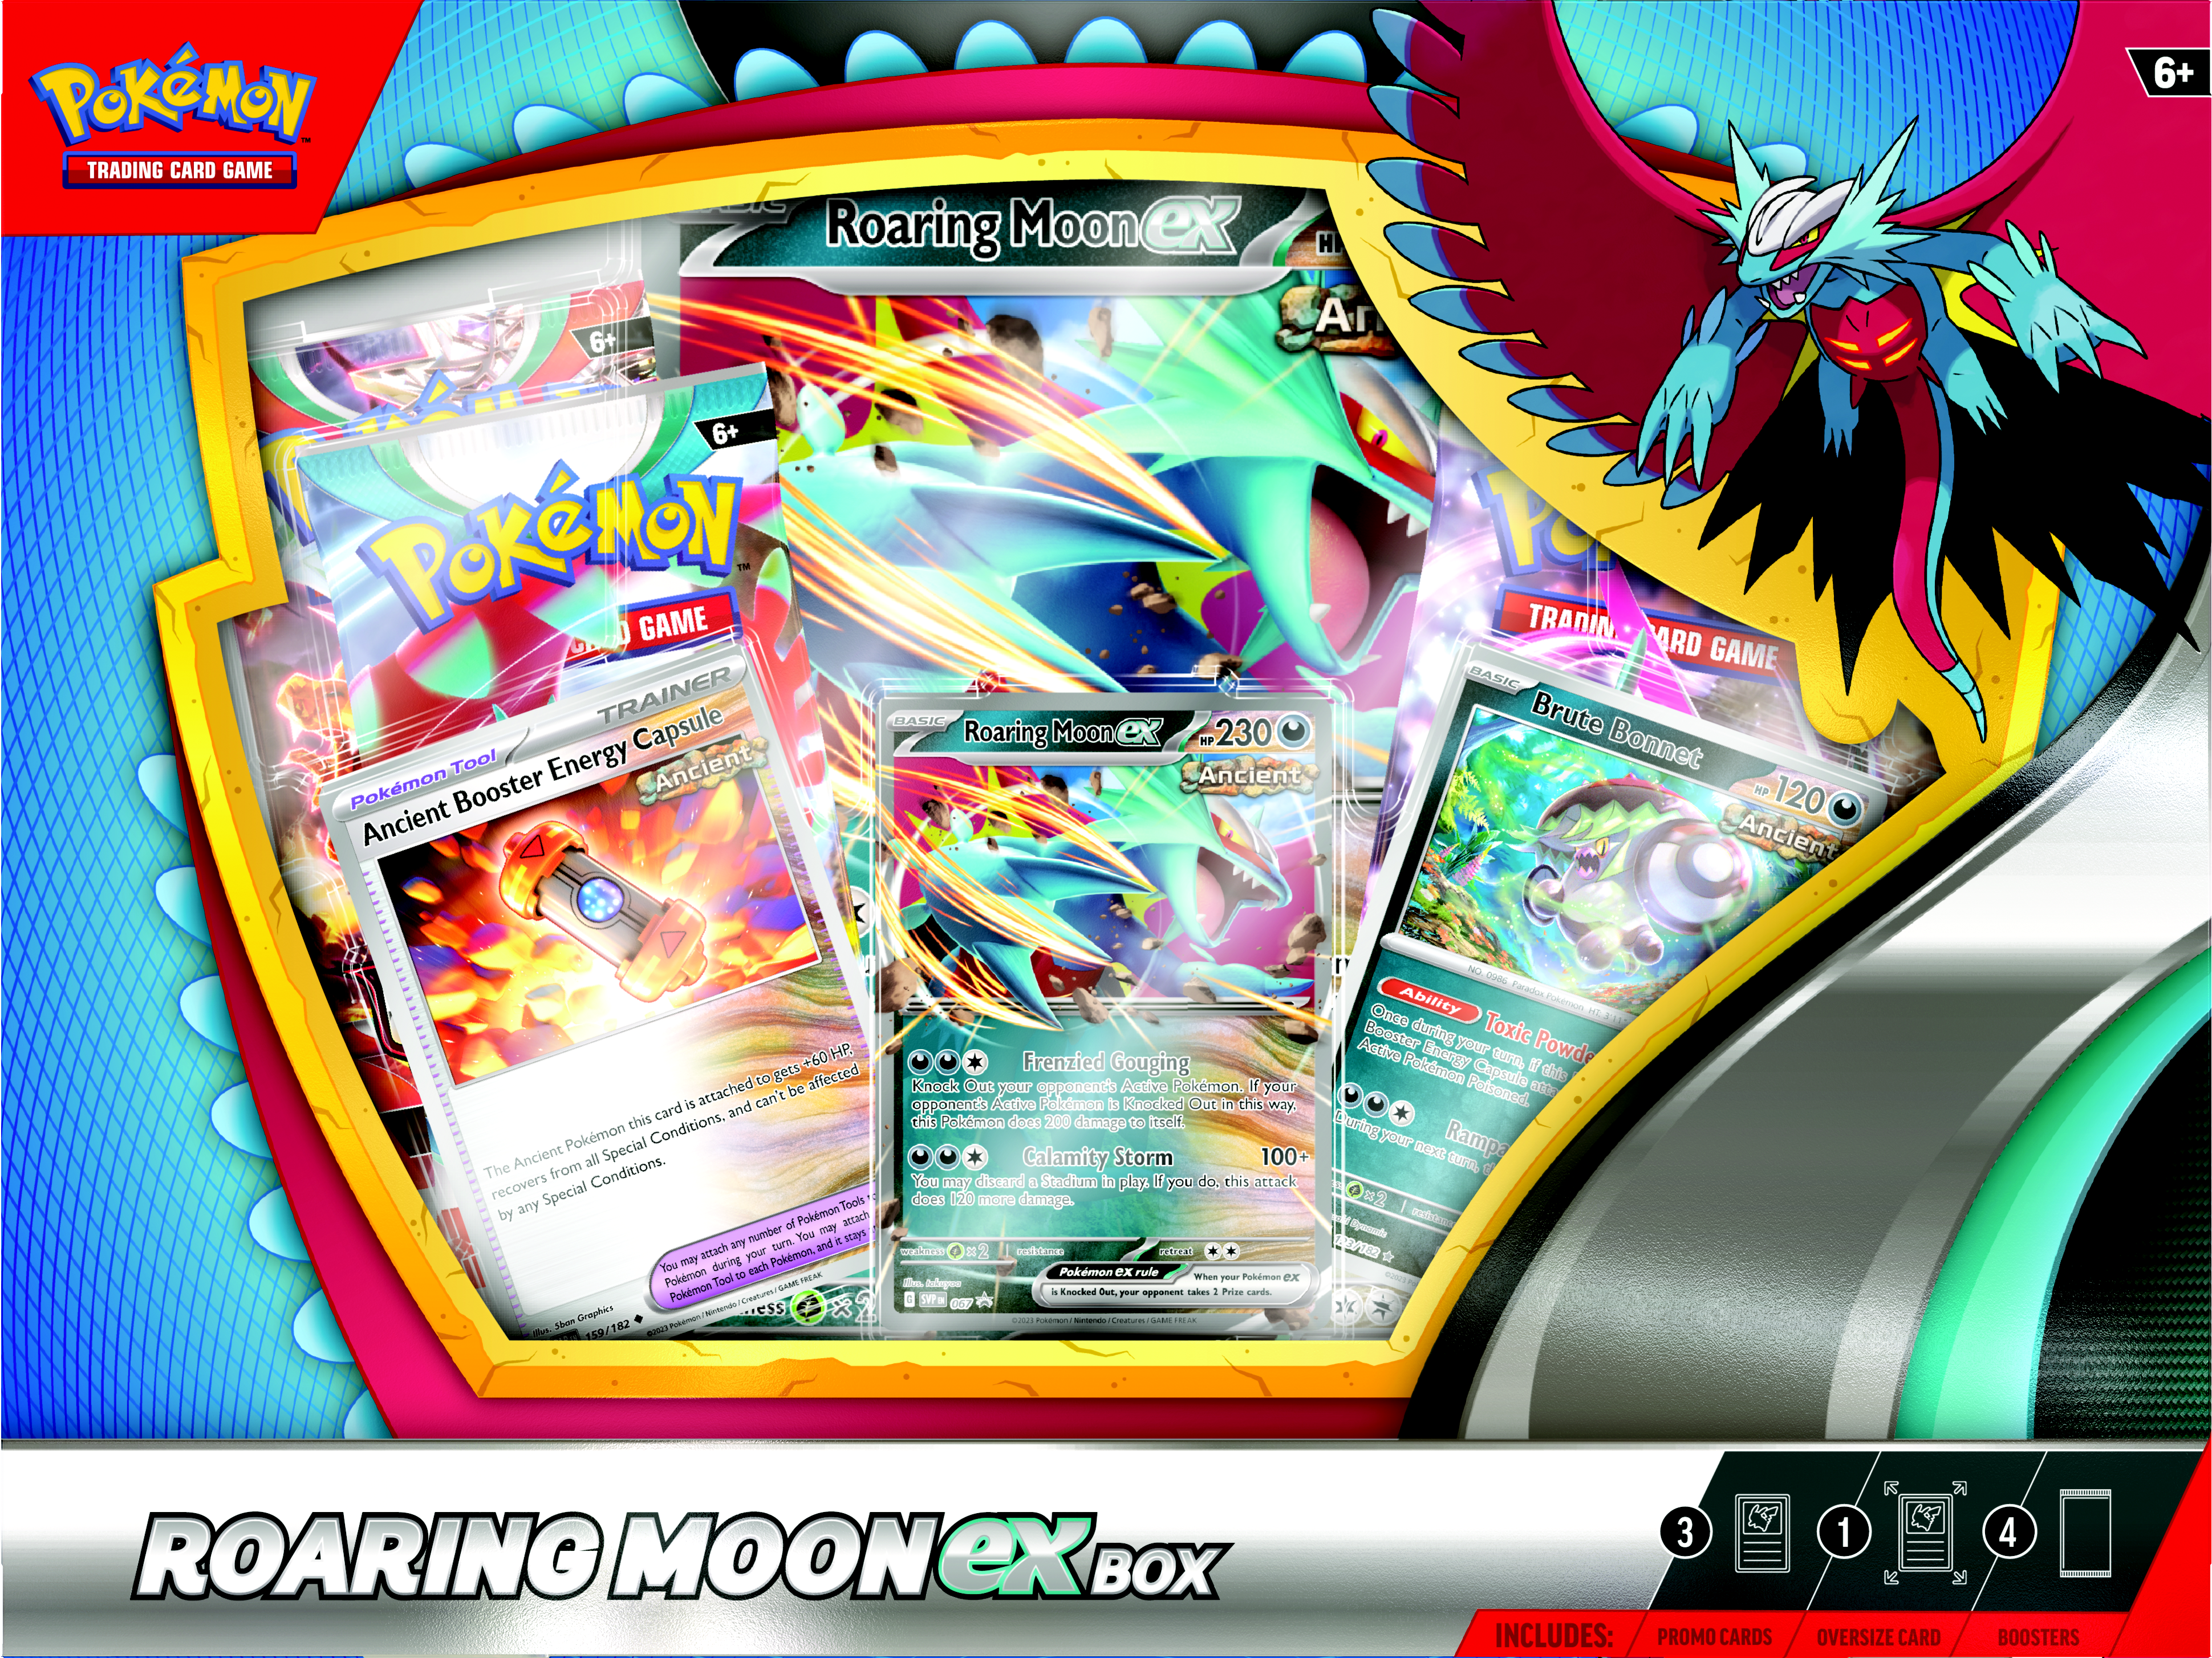 Pokemon Trading Card Game: Roaring Moon ex or Iron Valiant ex Deluxe Battle Box (Styles May Vary)